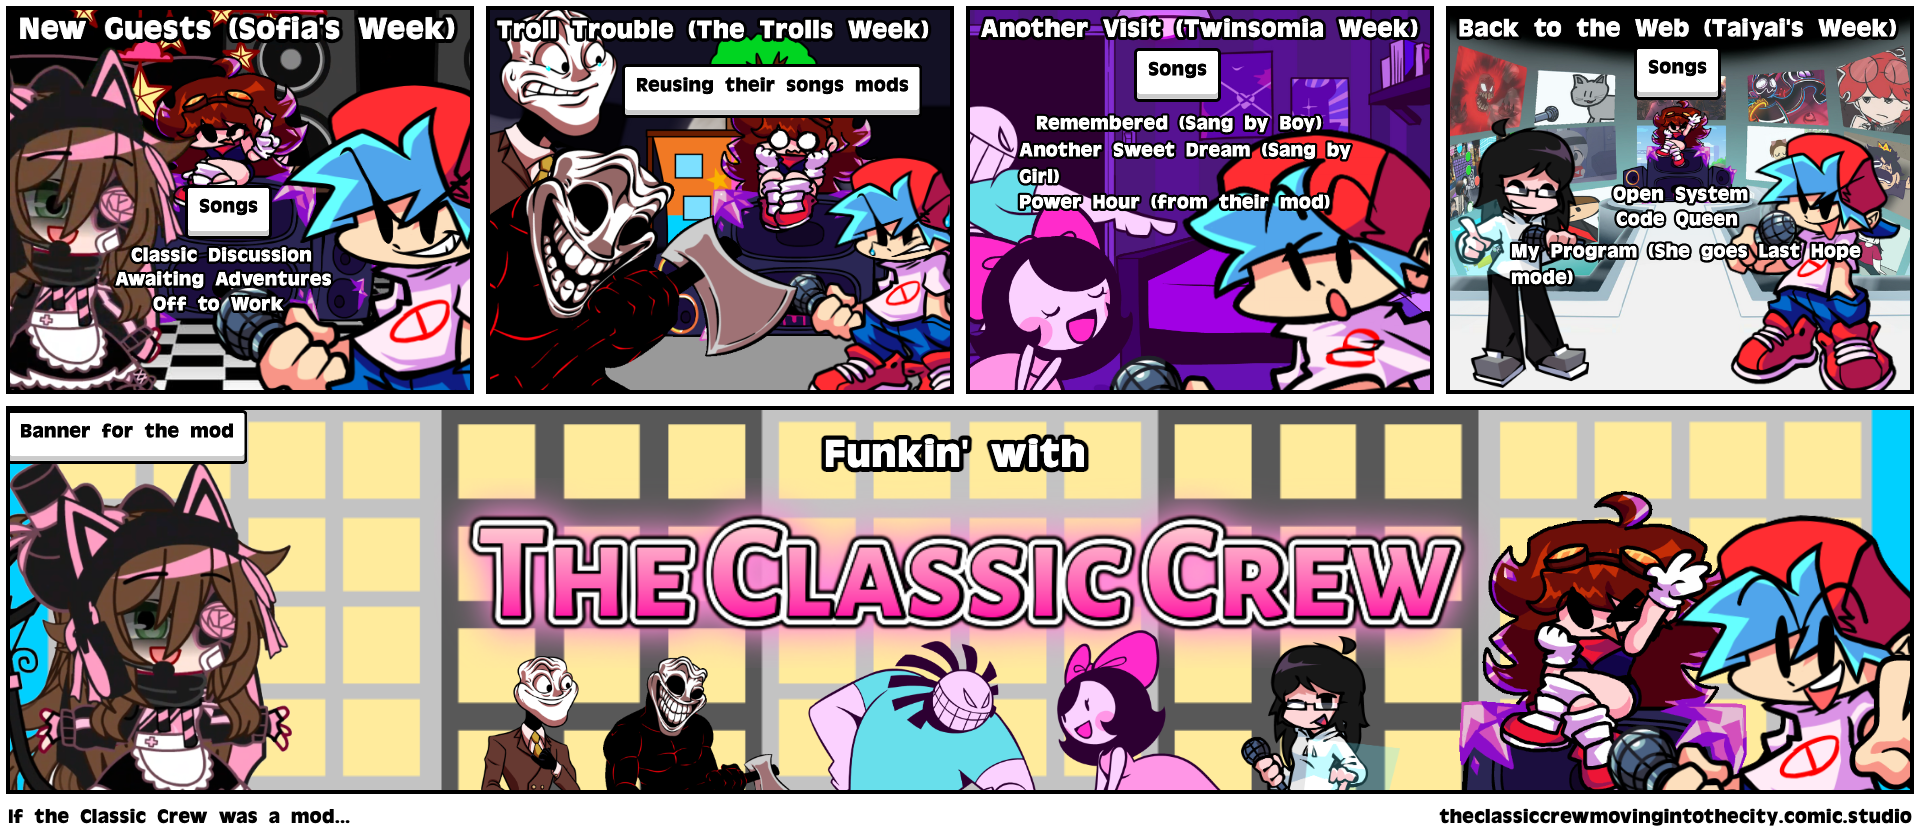 If the Classic Crew was a mod...